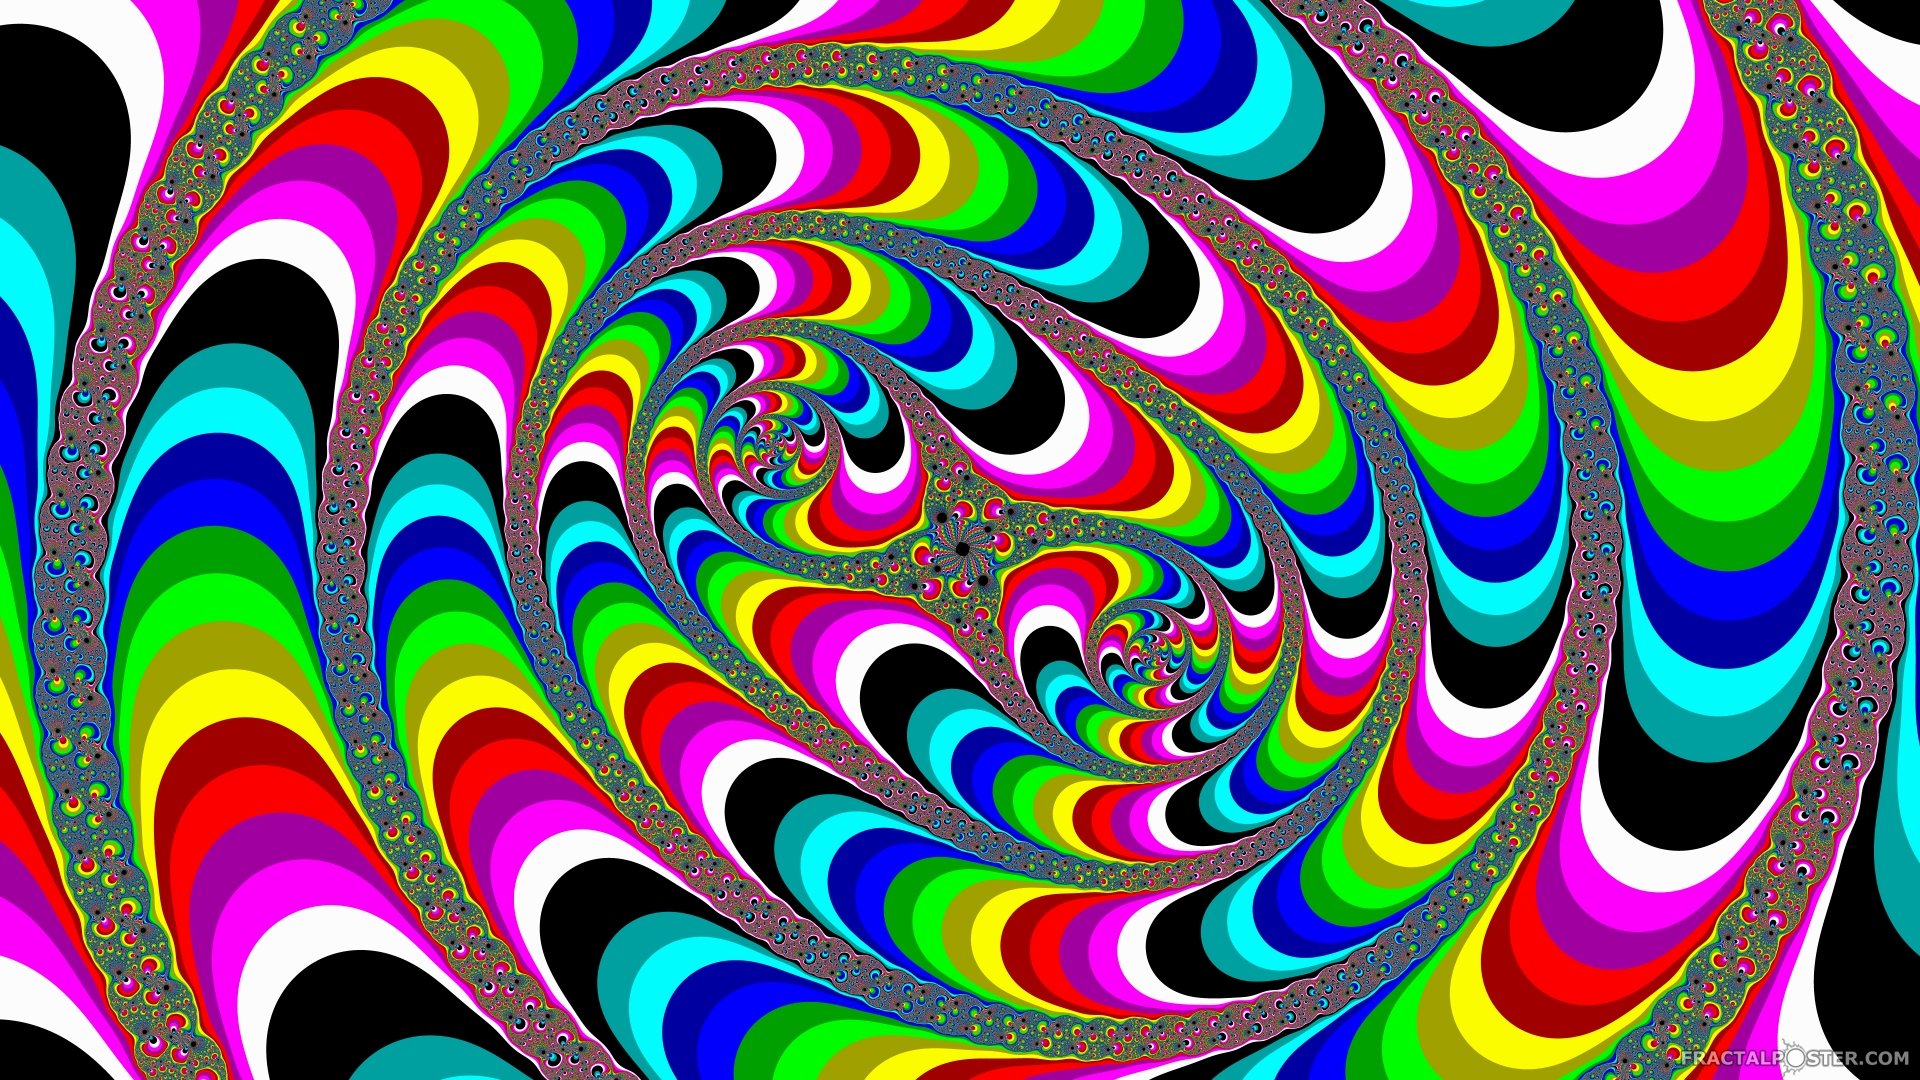 Psychedelic And Trippy Backgrounds For Your Desktop - High Resolution Psychedelic Art , HD Wallpaper & Backgrounds